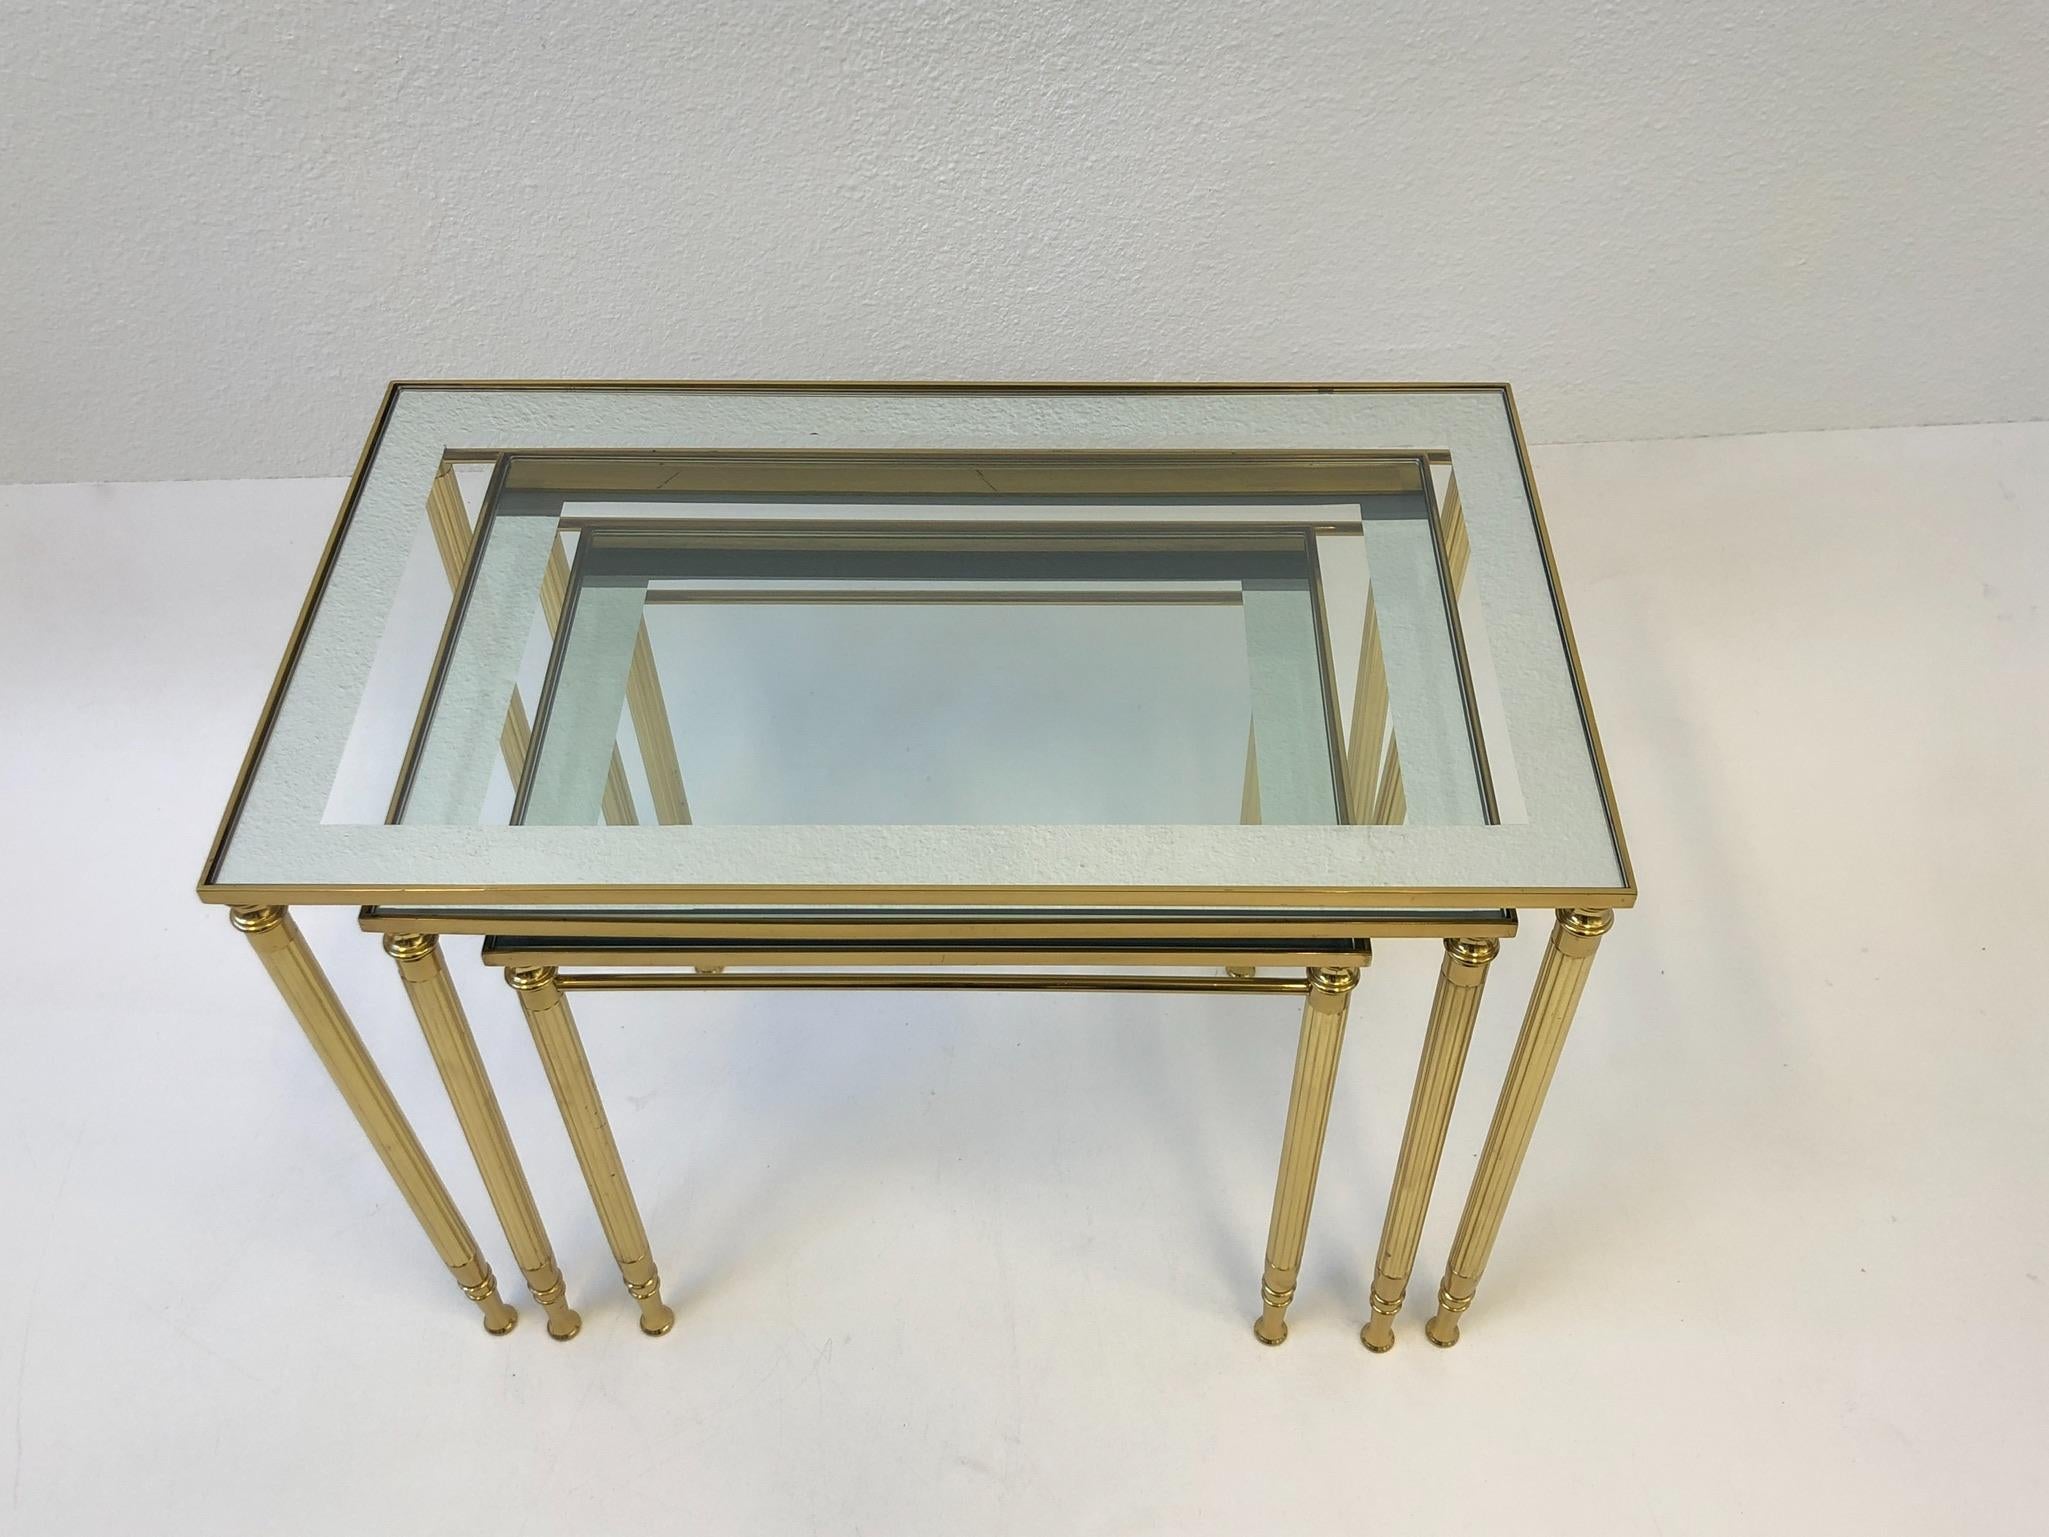 Polished Set of Three Italian Brass and Glass Nesting Tables by Maison Baguès